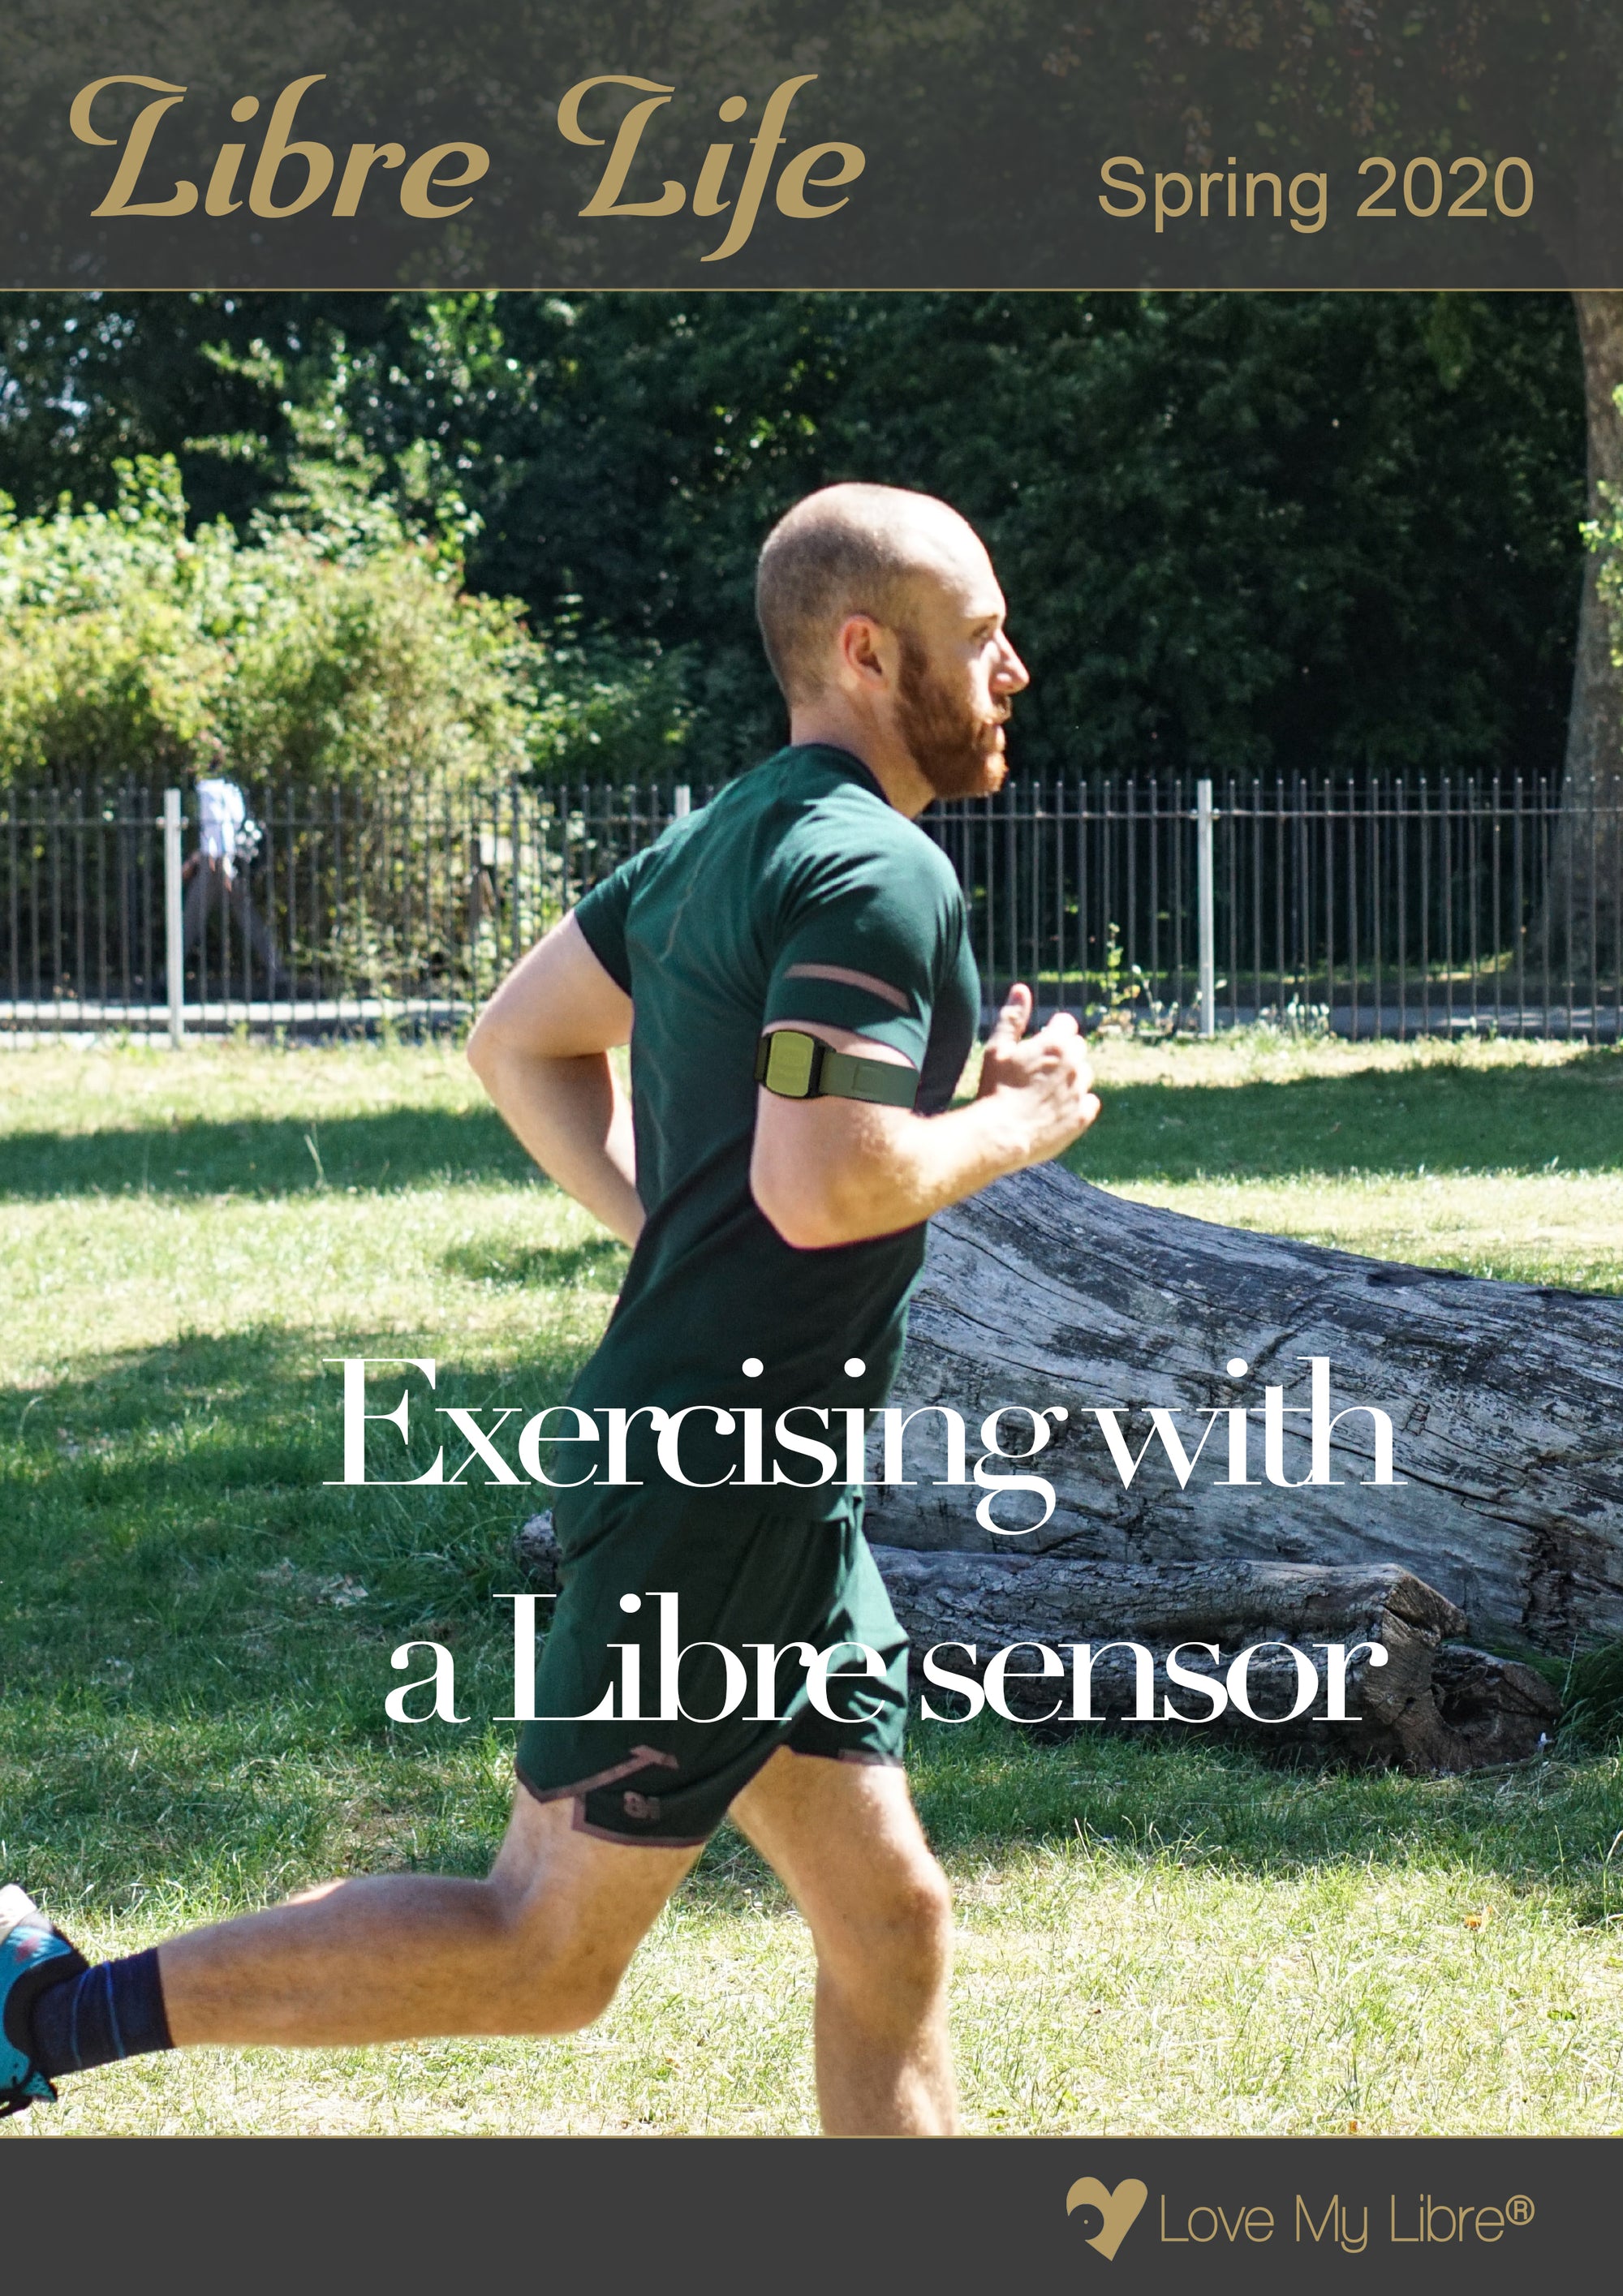 Issue of Libre Life Spring 2020, titled Exercising with a Libre Sensor. Cover image shows male runner in park wearing a Libreband cover for Libre sensor on arm.